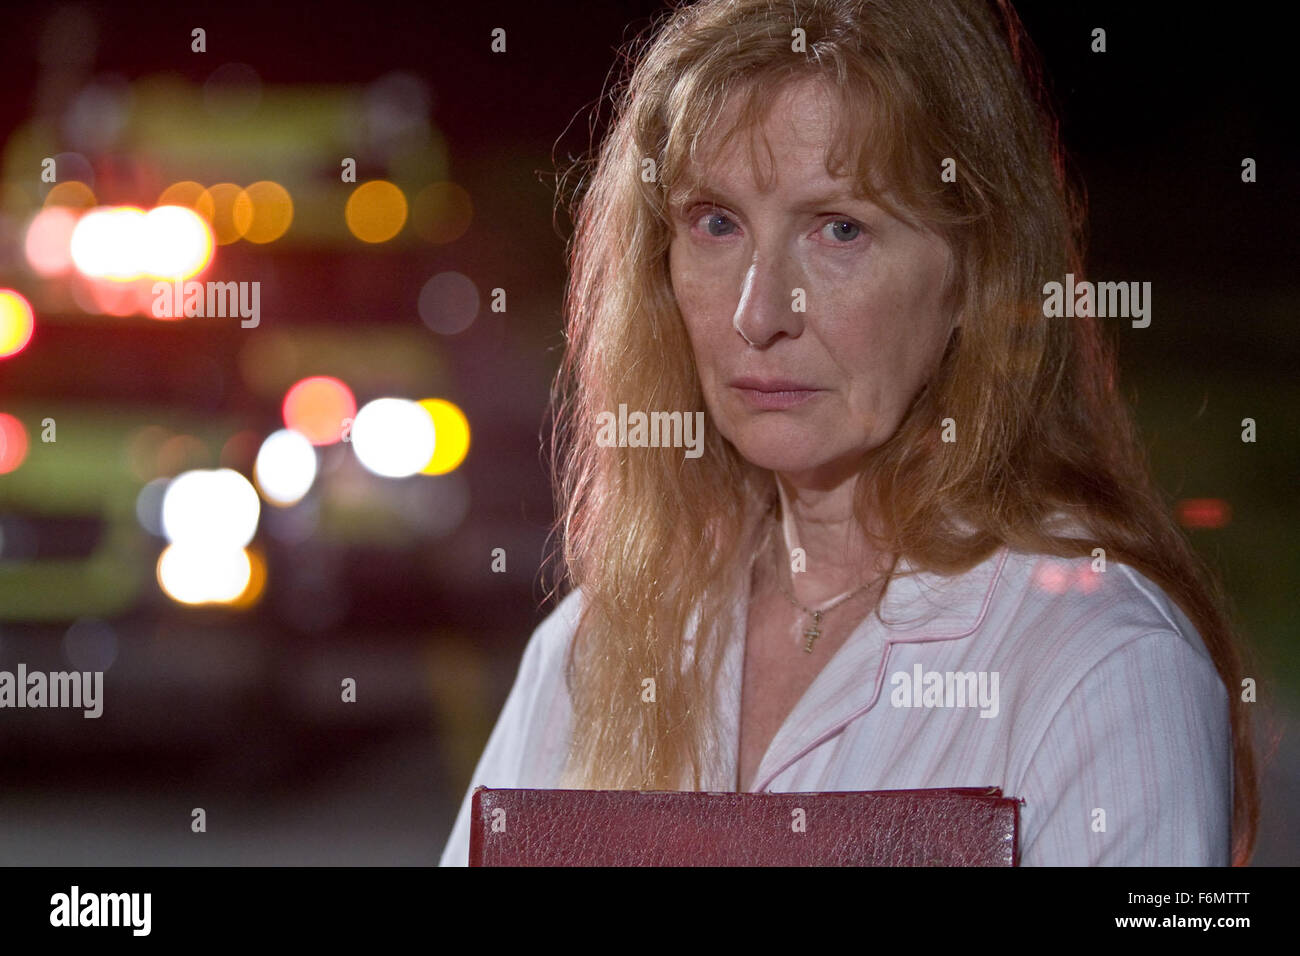 RELEASE DATE: October 8, 2010. MOVIE TITLE: Stone. STUDIO: Overture Films. PLOT: A convicted arsonist looks to manipulate a parole officer into a plan to secure his parole by placing his beautiful wife in the lawman's path. PICTURED: FRANCES CONROY as Madylyn Stock Photo